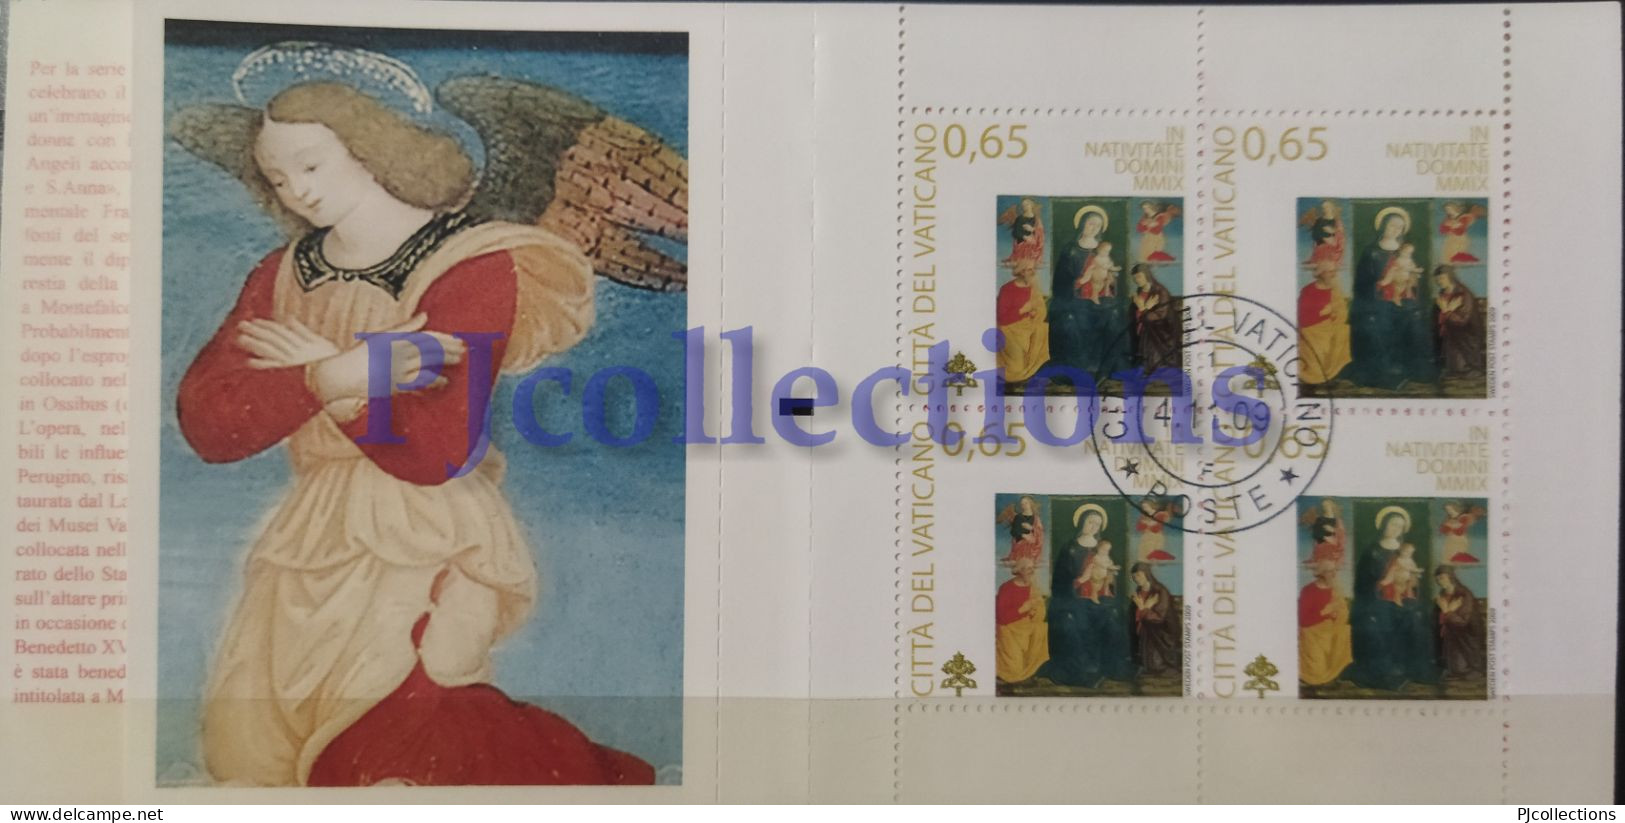 3764- VATICANO- VATICAN CITY 2009 NATALE - CHRISTMAS FULL BOOKLET 4 STAMPS C/ANNULLO 1° GIORNO - USED - Oblitérés